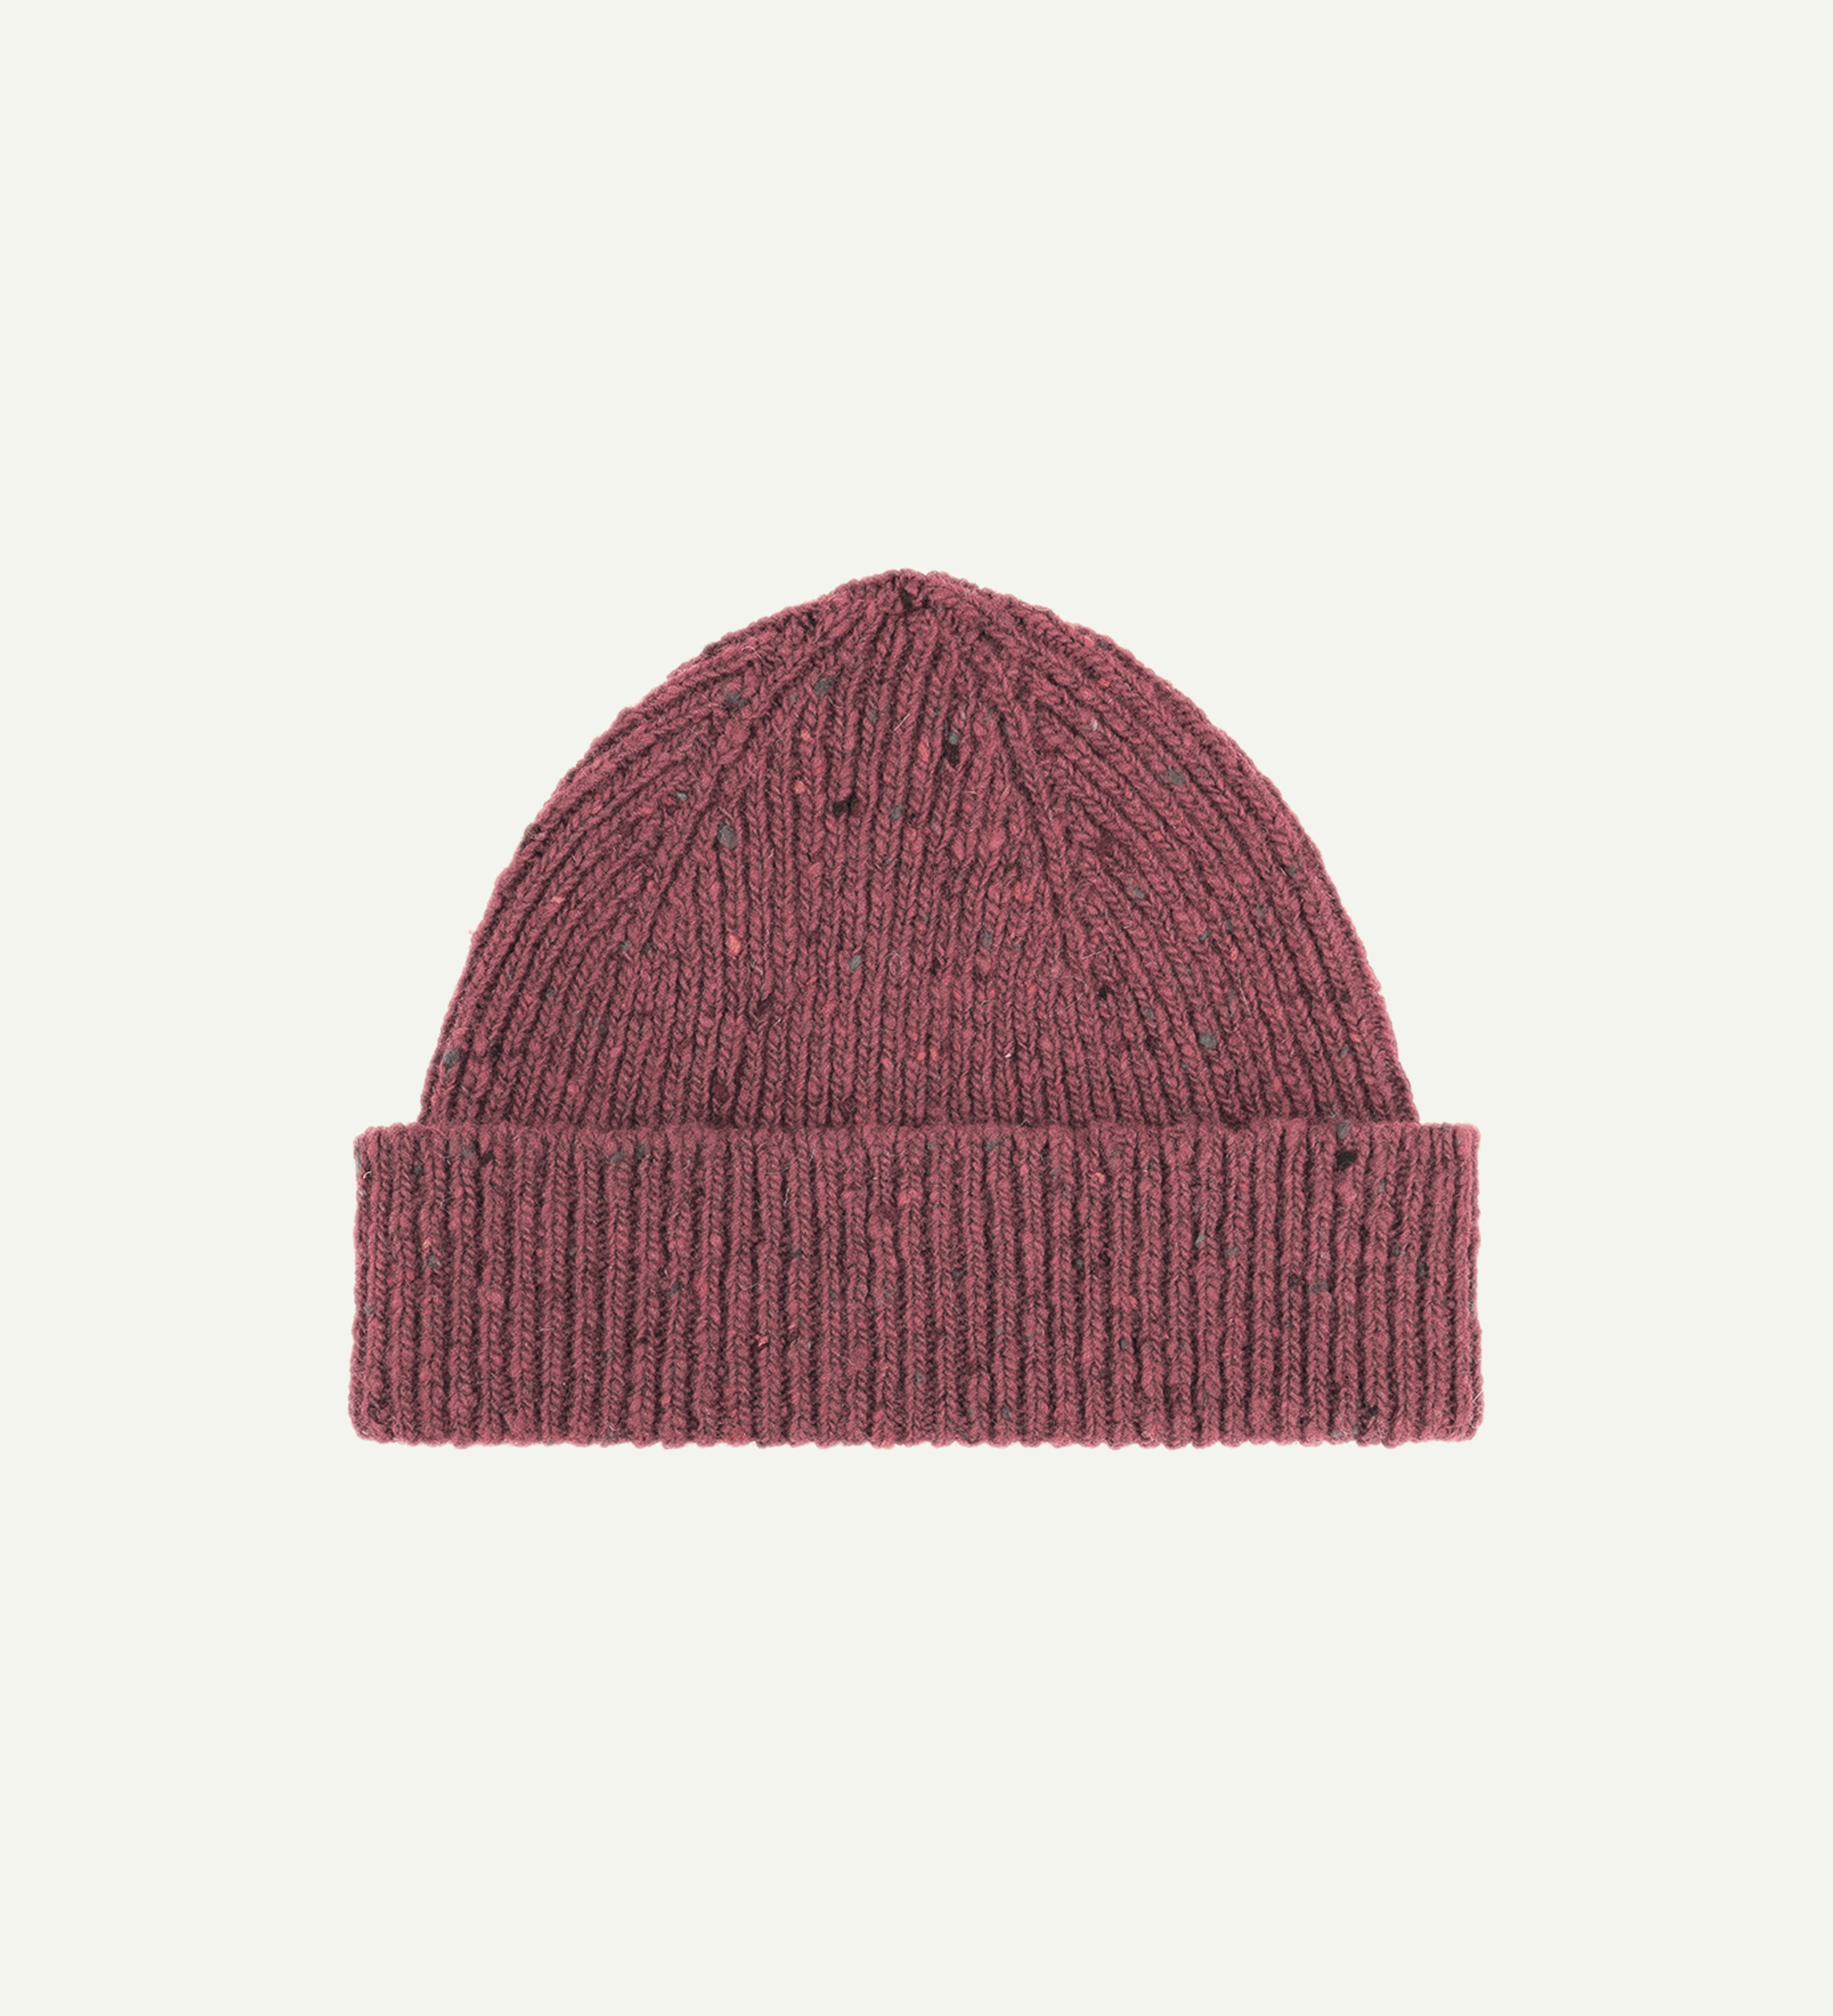  Flat view of Uskees 4003 donegal wool hat in 'dusty pink' . There is a clear view of the adjustable cuff and the 'speckled' nature of the hat.